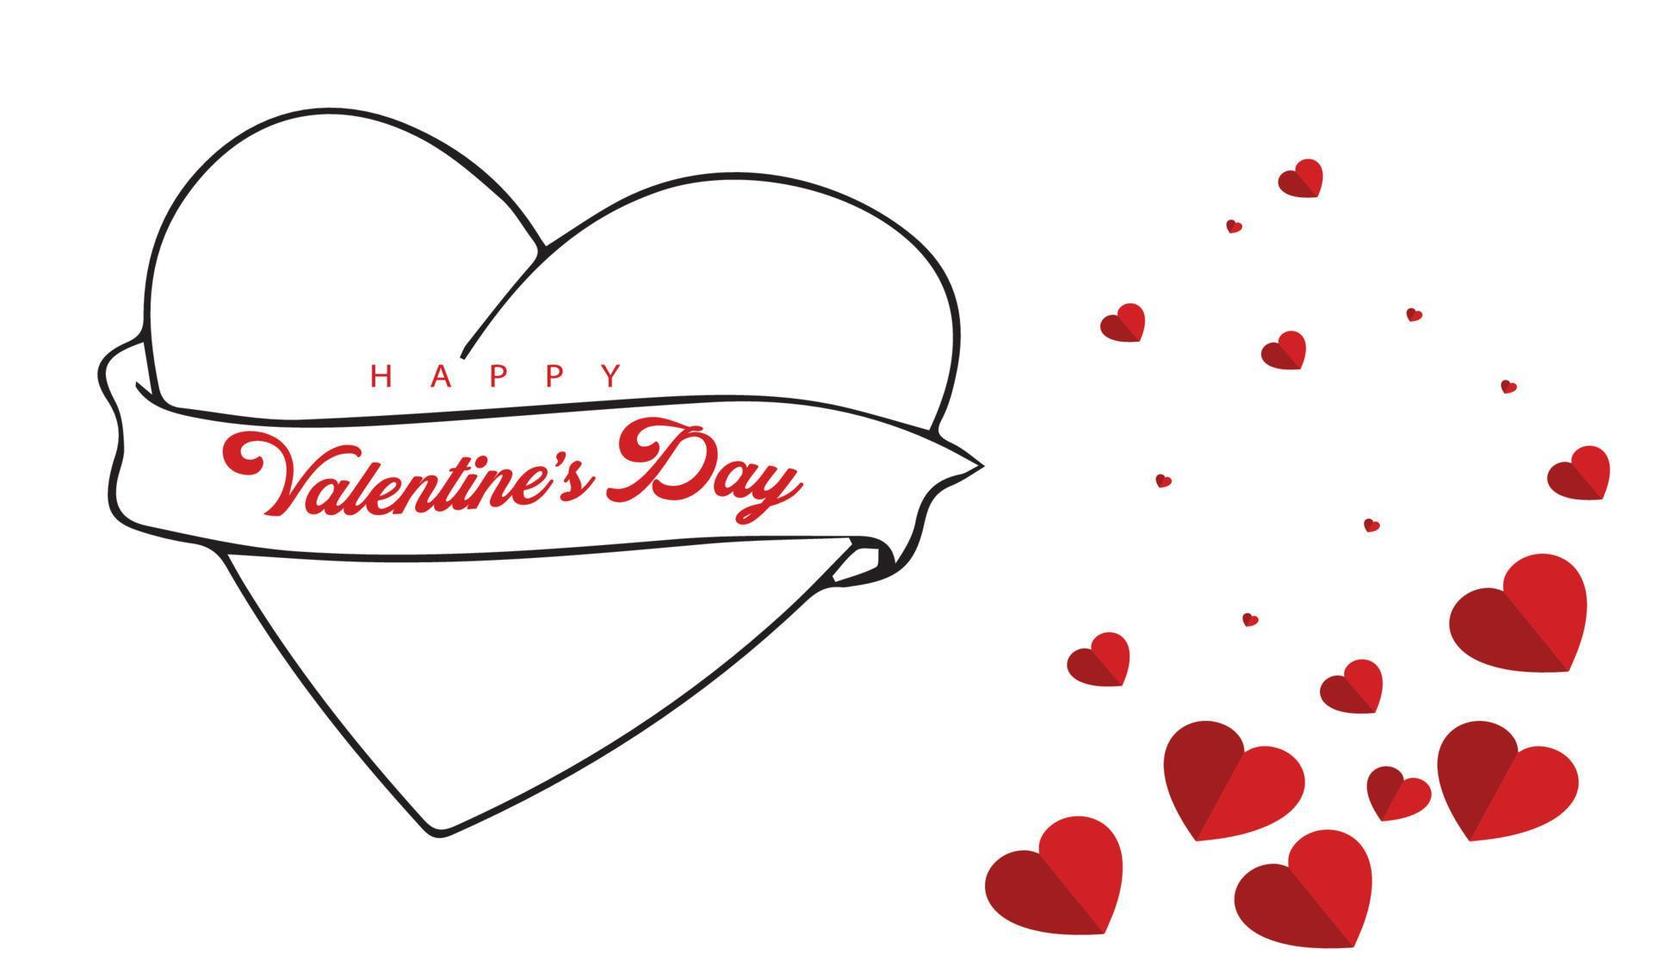 Happy Valentines Day Background Design With Papercut Style Curve Love Shapes vector